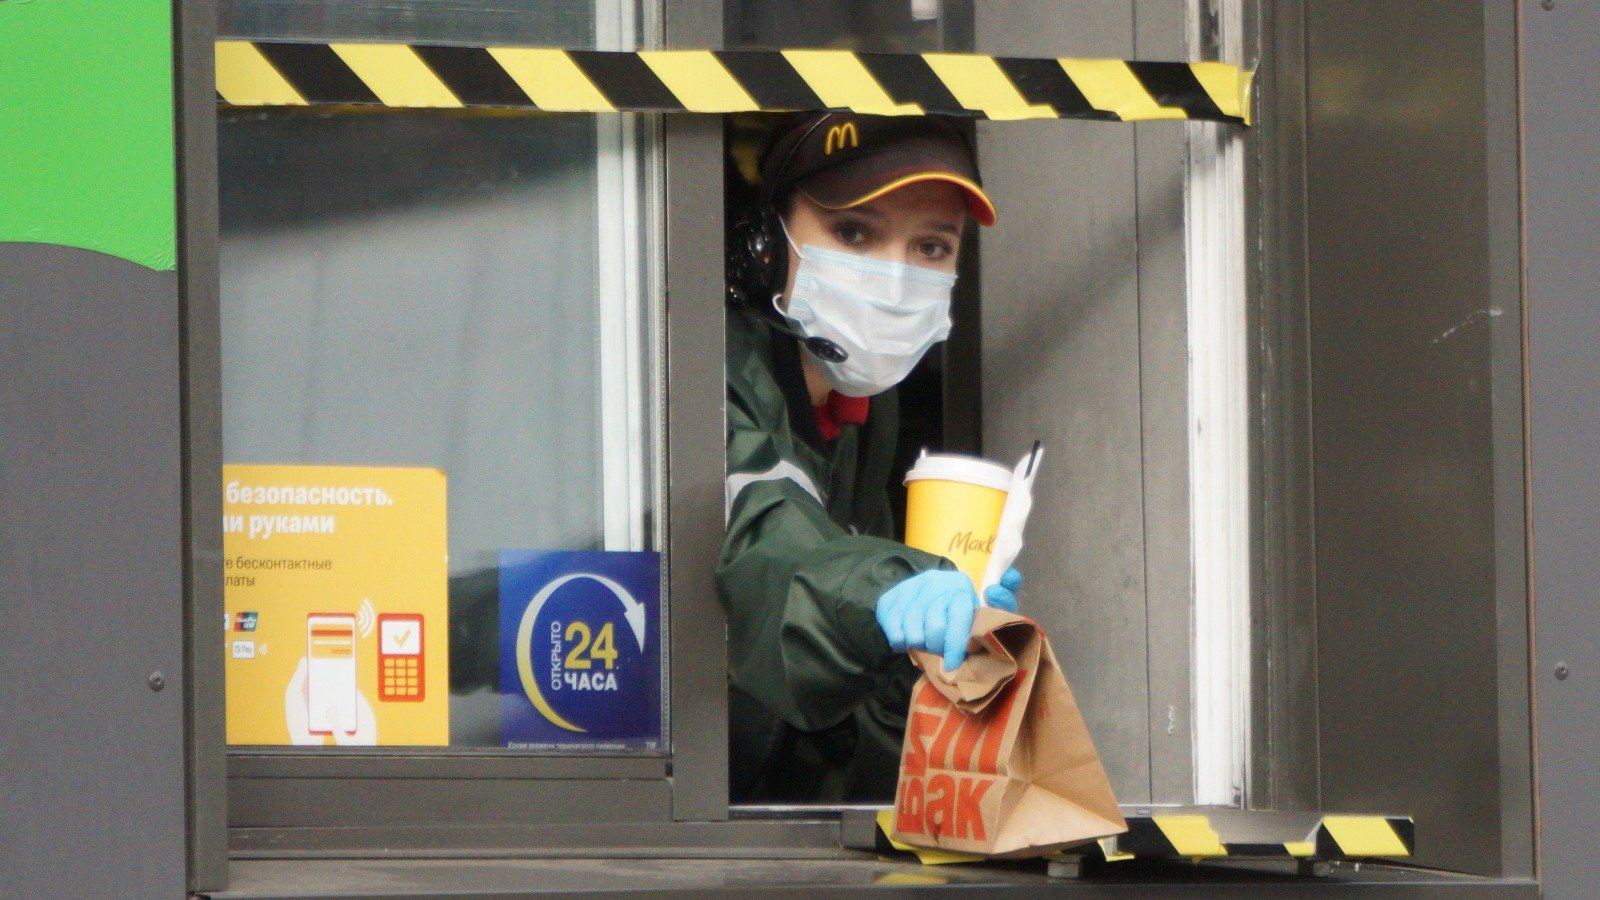 Fast Food Is Thriving During The Pandemic. Here's Why That's A Real Problem - Mashed